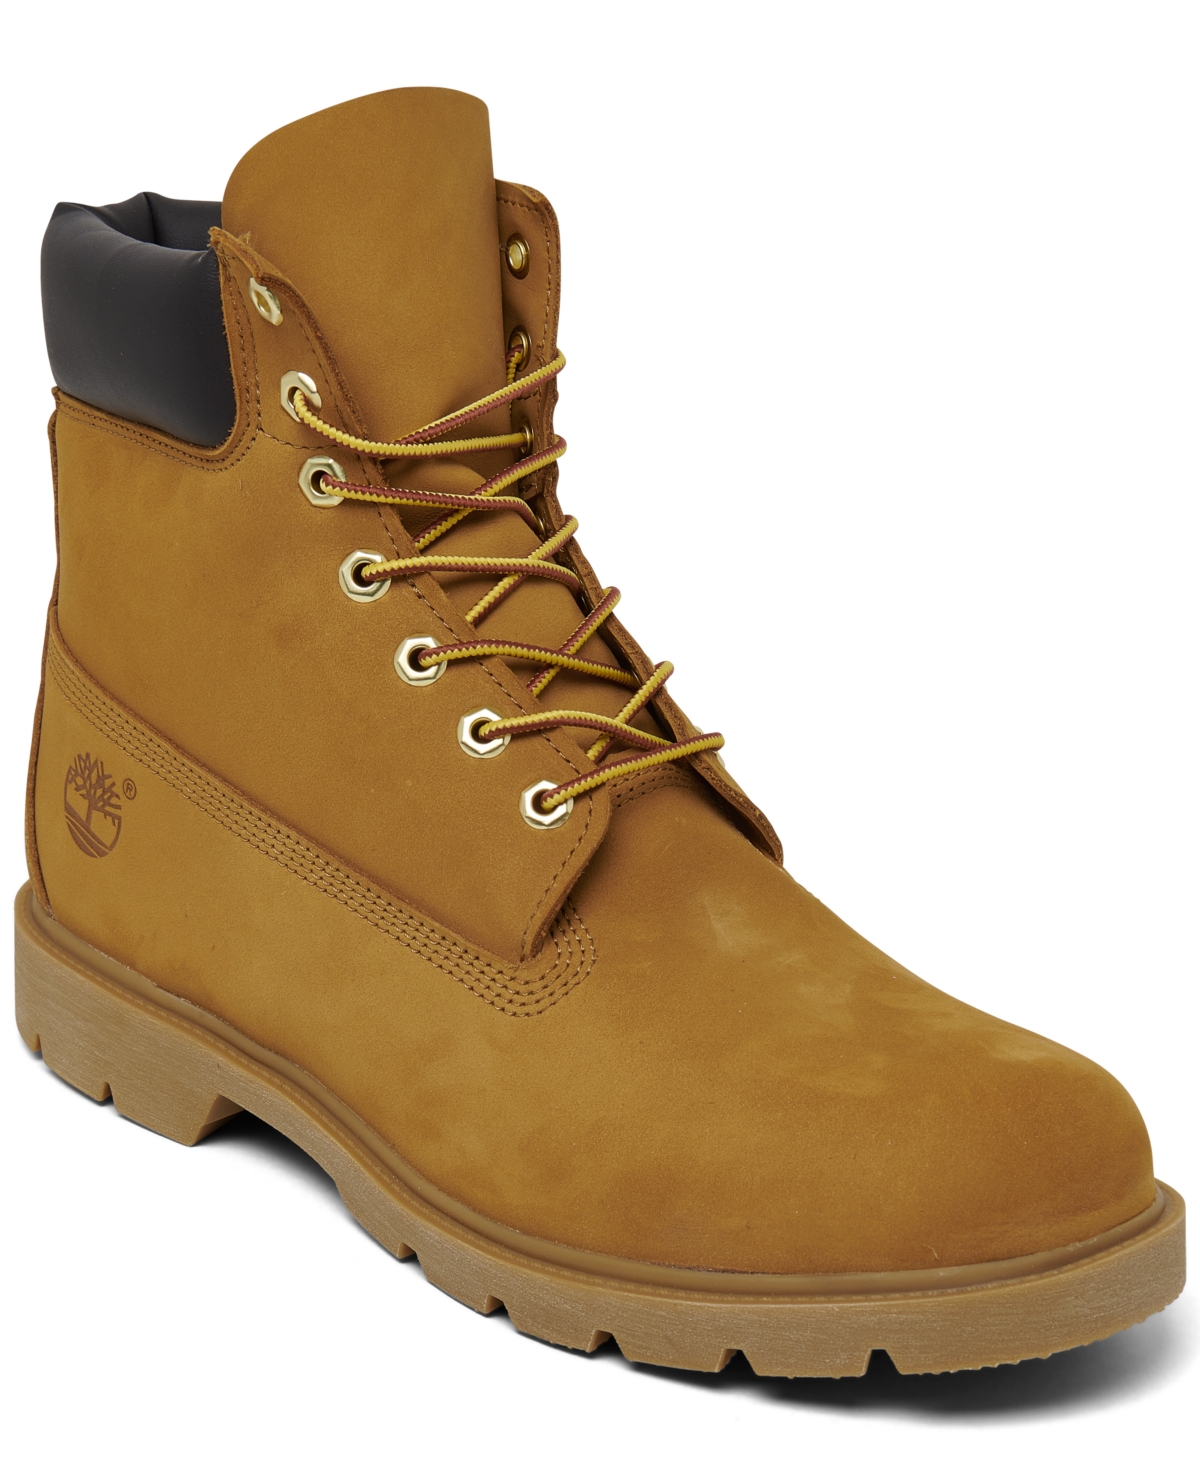 Men's 6 Inch Classic Waterproof Boots from Finish Line - Wheat